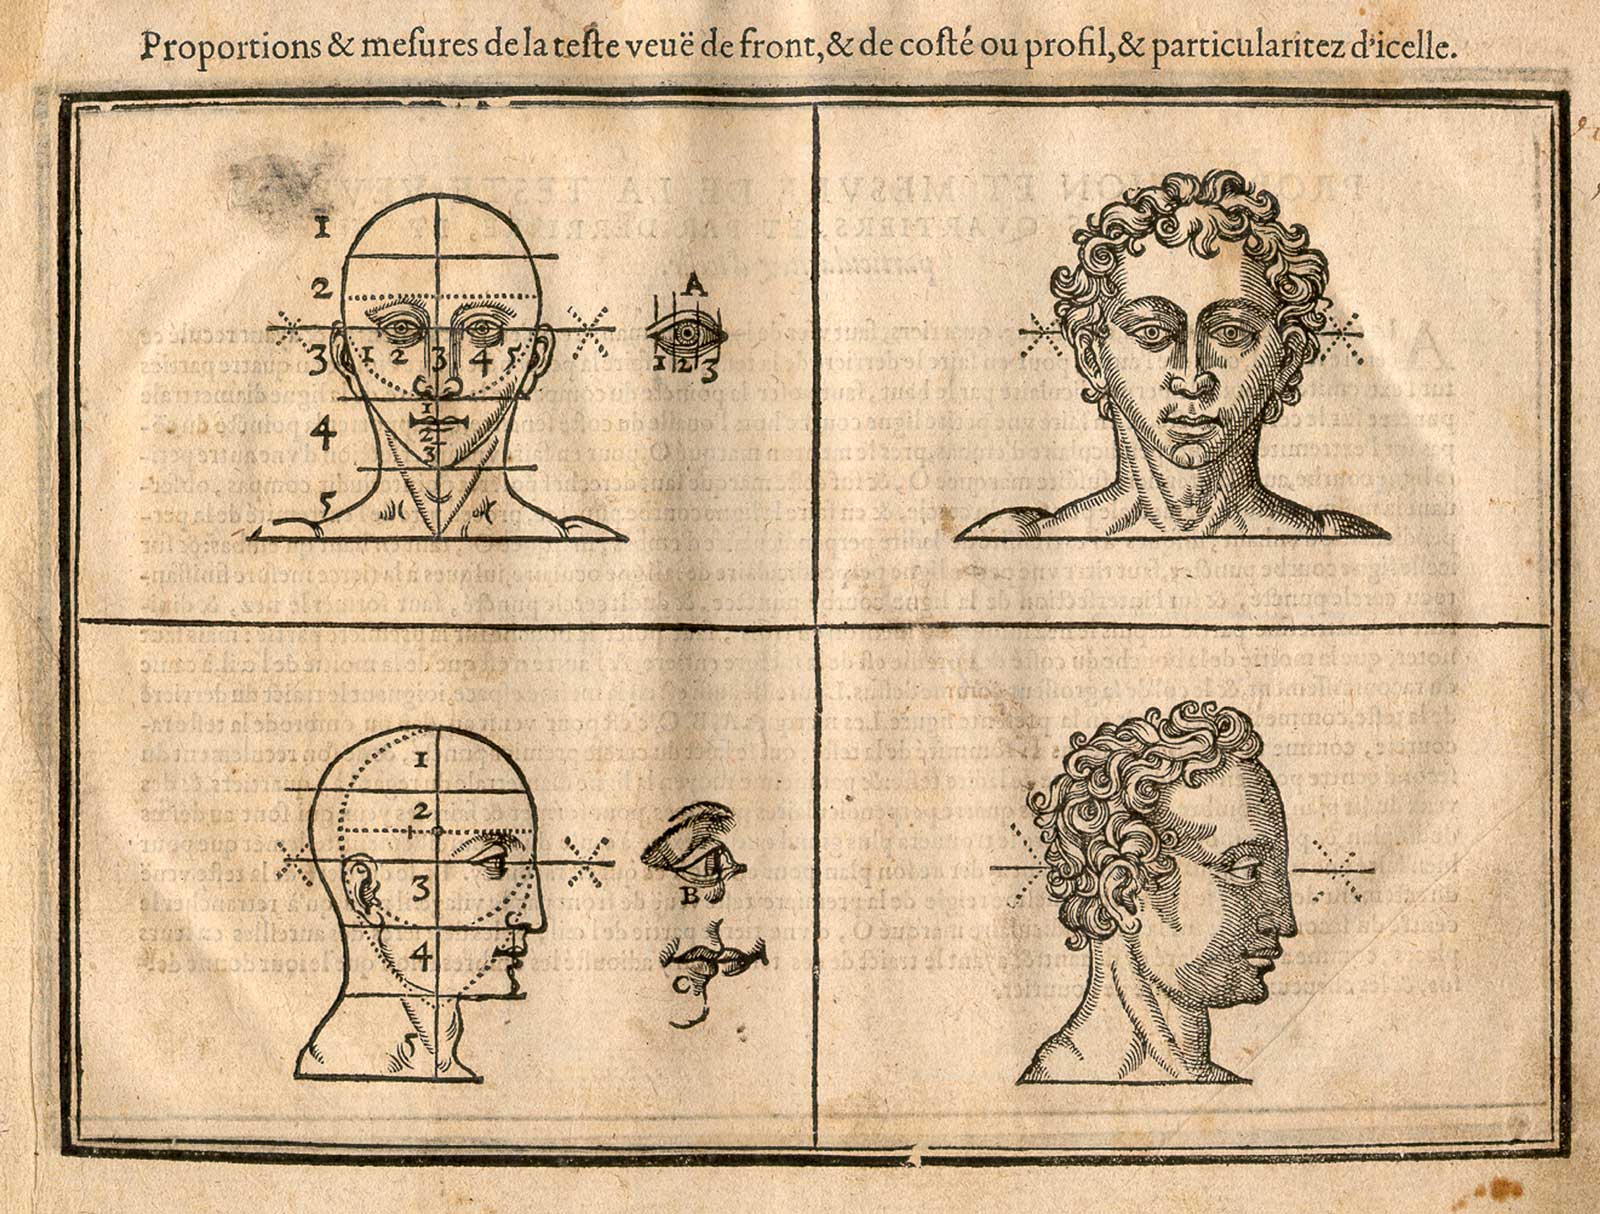 Woodcut illustration with four parts, showing two male heads facing the viewer in the top two quadrants with proportional lines and measurements applied to the one on the left, and at bottom two heads facing to the right with proportional lines and measurements applied to the one on the left, from Jehan Cousin’s Livre de pourtraiture, NLM Call no.: WZ 250 C8673L 1608.